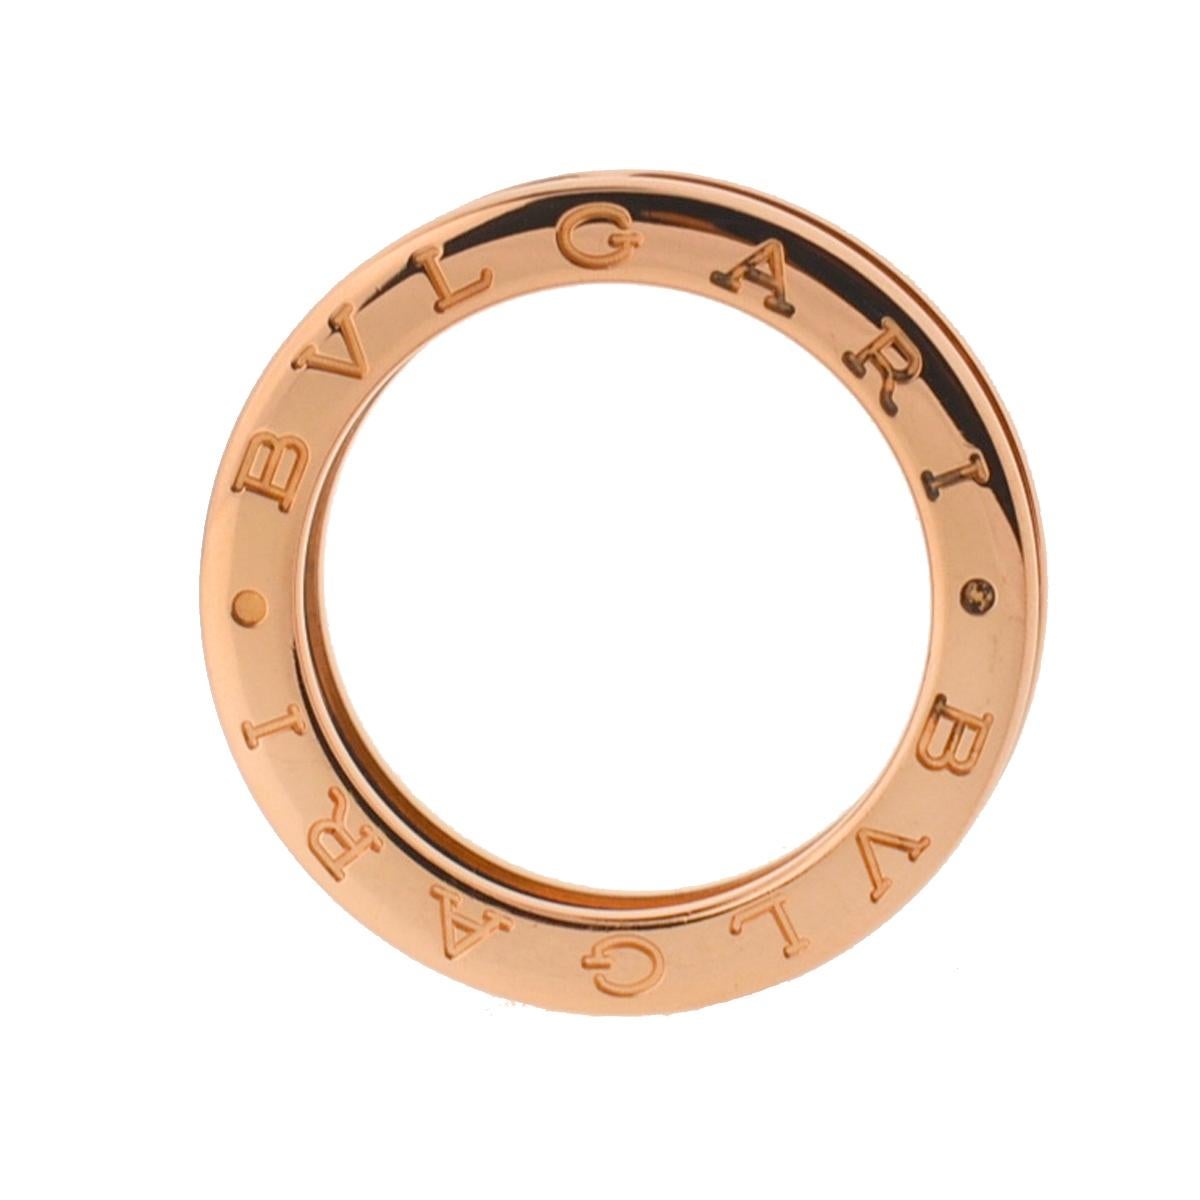 Company-BVLGARI
Style-Band
Metal-18k Rose Gold
Stones-N/A
Weight-7.6 Grams
Size-7 / 54 BVLGARI Size
Includes-Ring ONLY
SKU-10216-1MEE